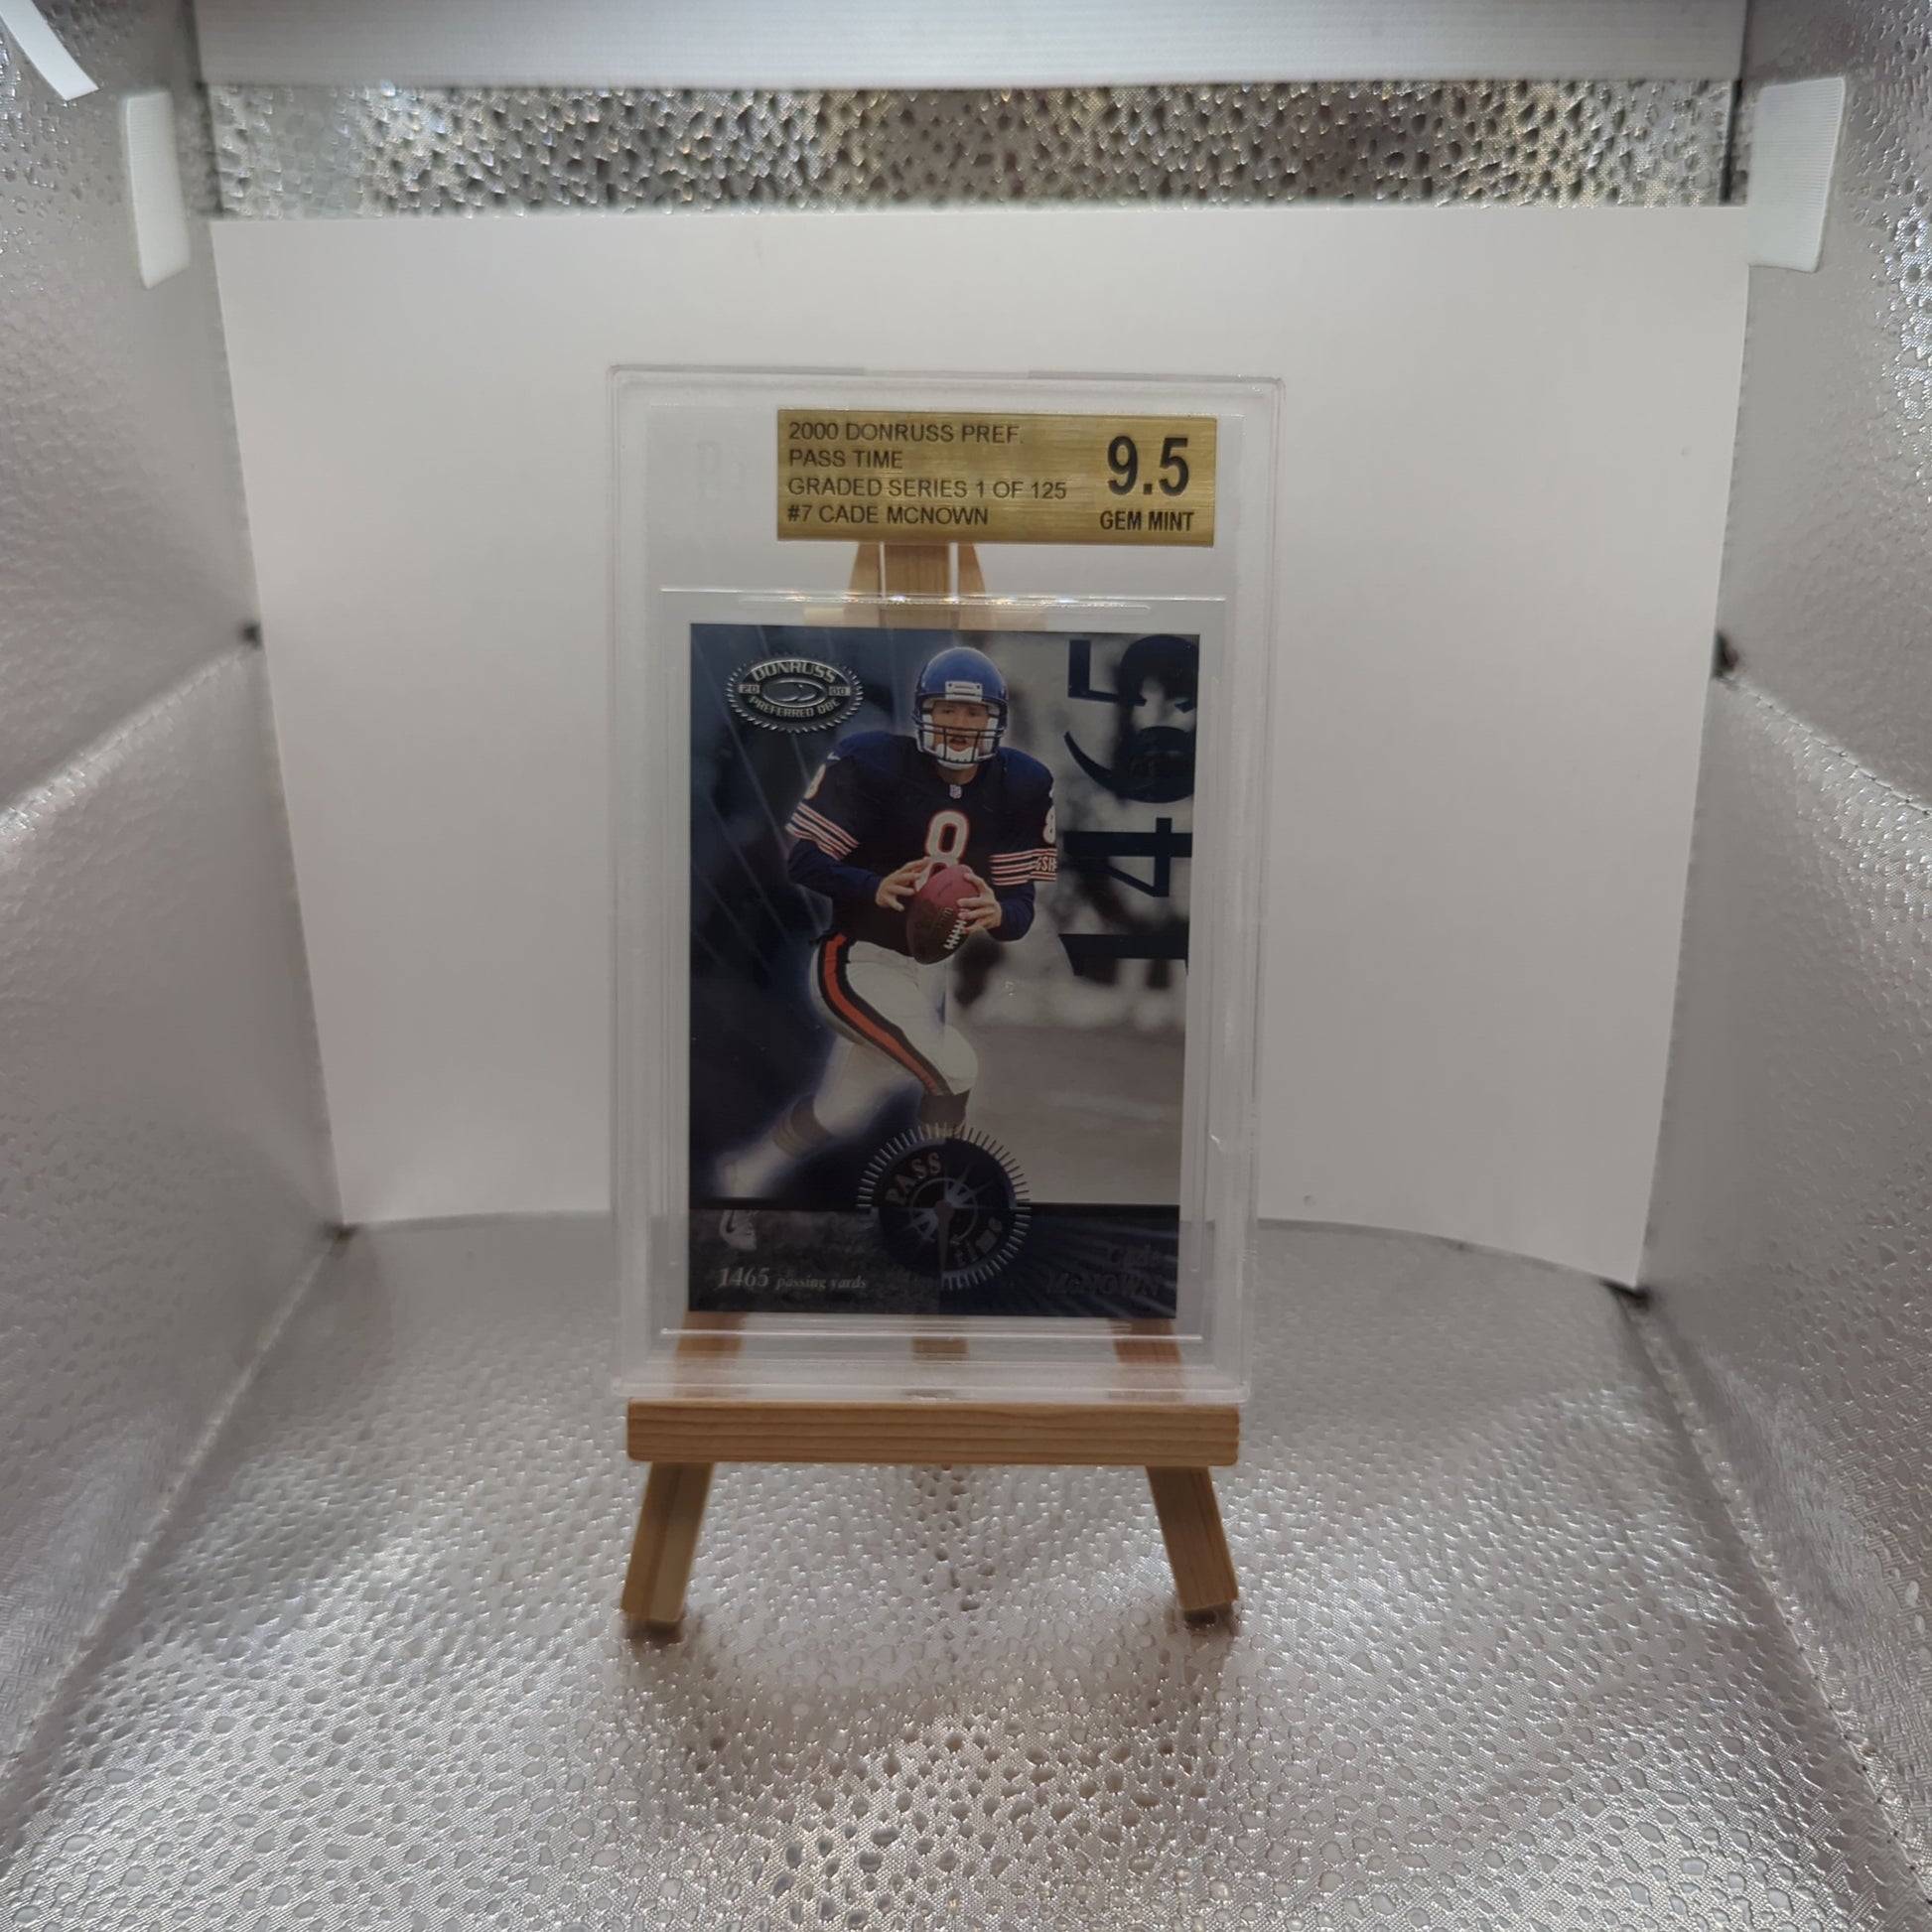 2000 Donruss Pref Pass Time graded series 1 of 125 #7 Cade McNown Chicago Bears FRENLY BRICKS - Open 7 Days